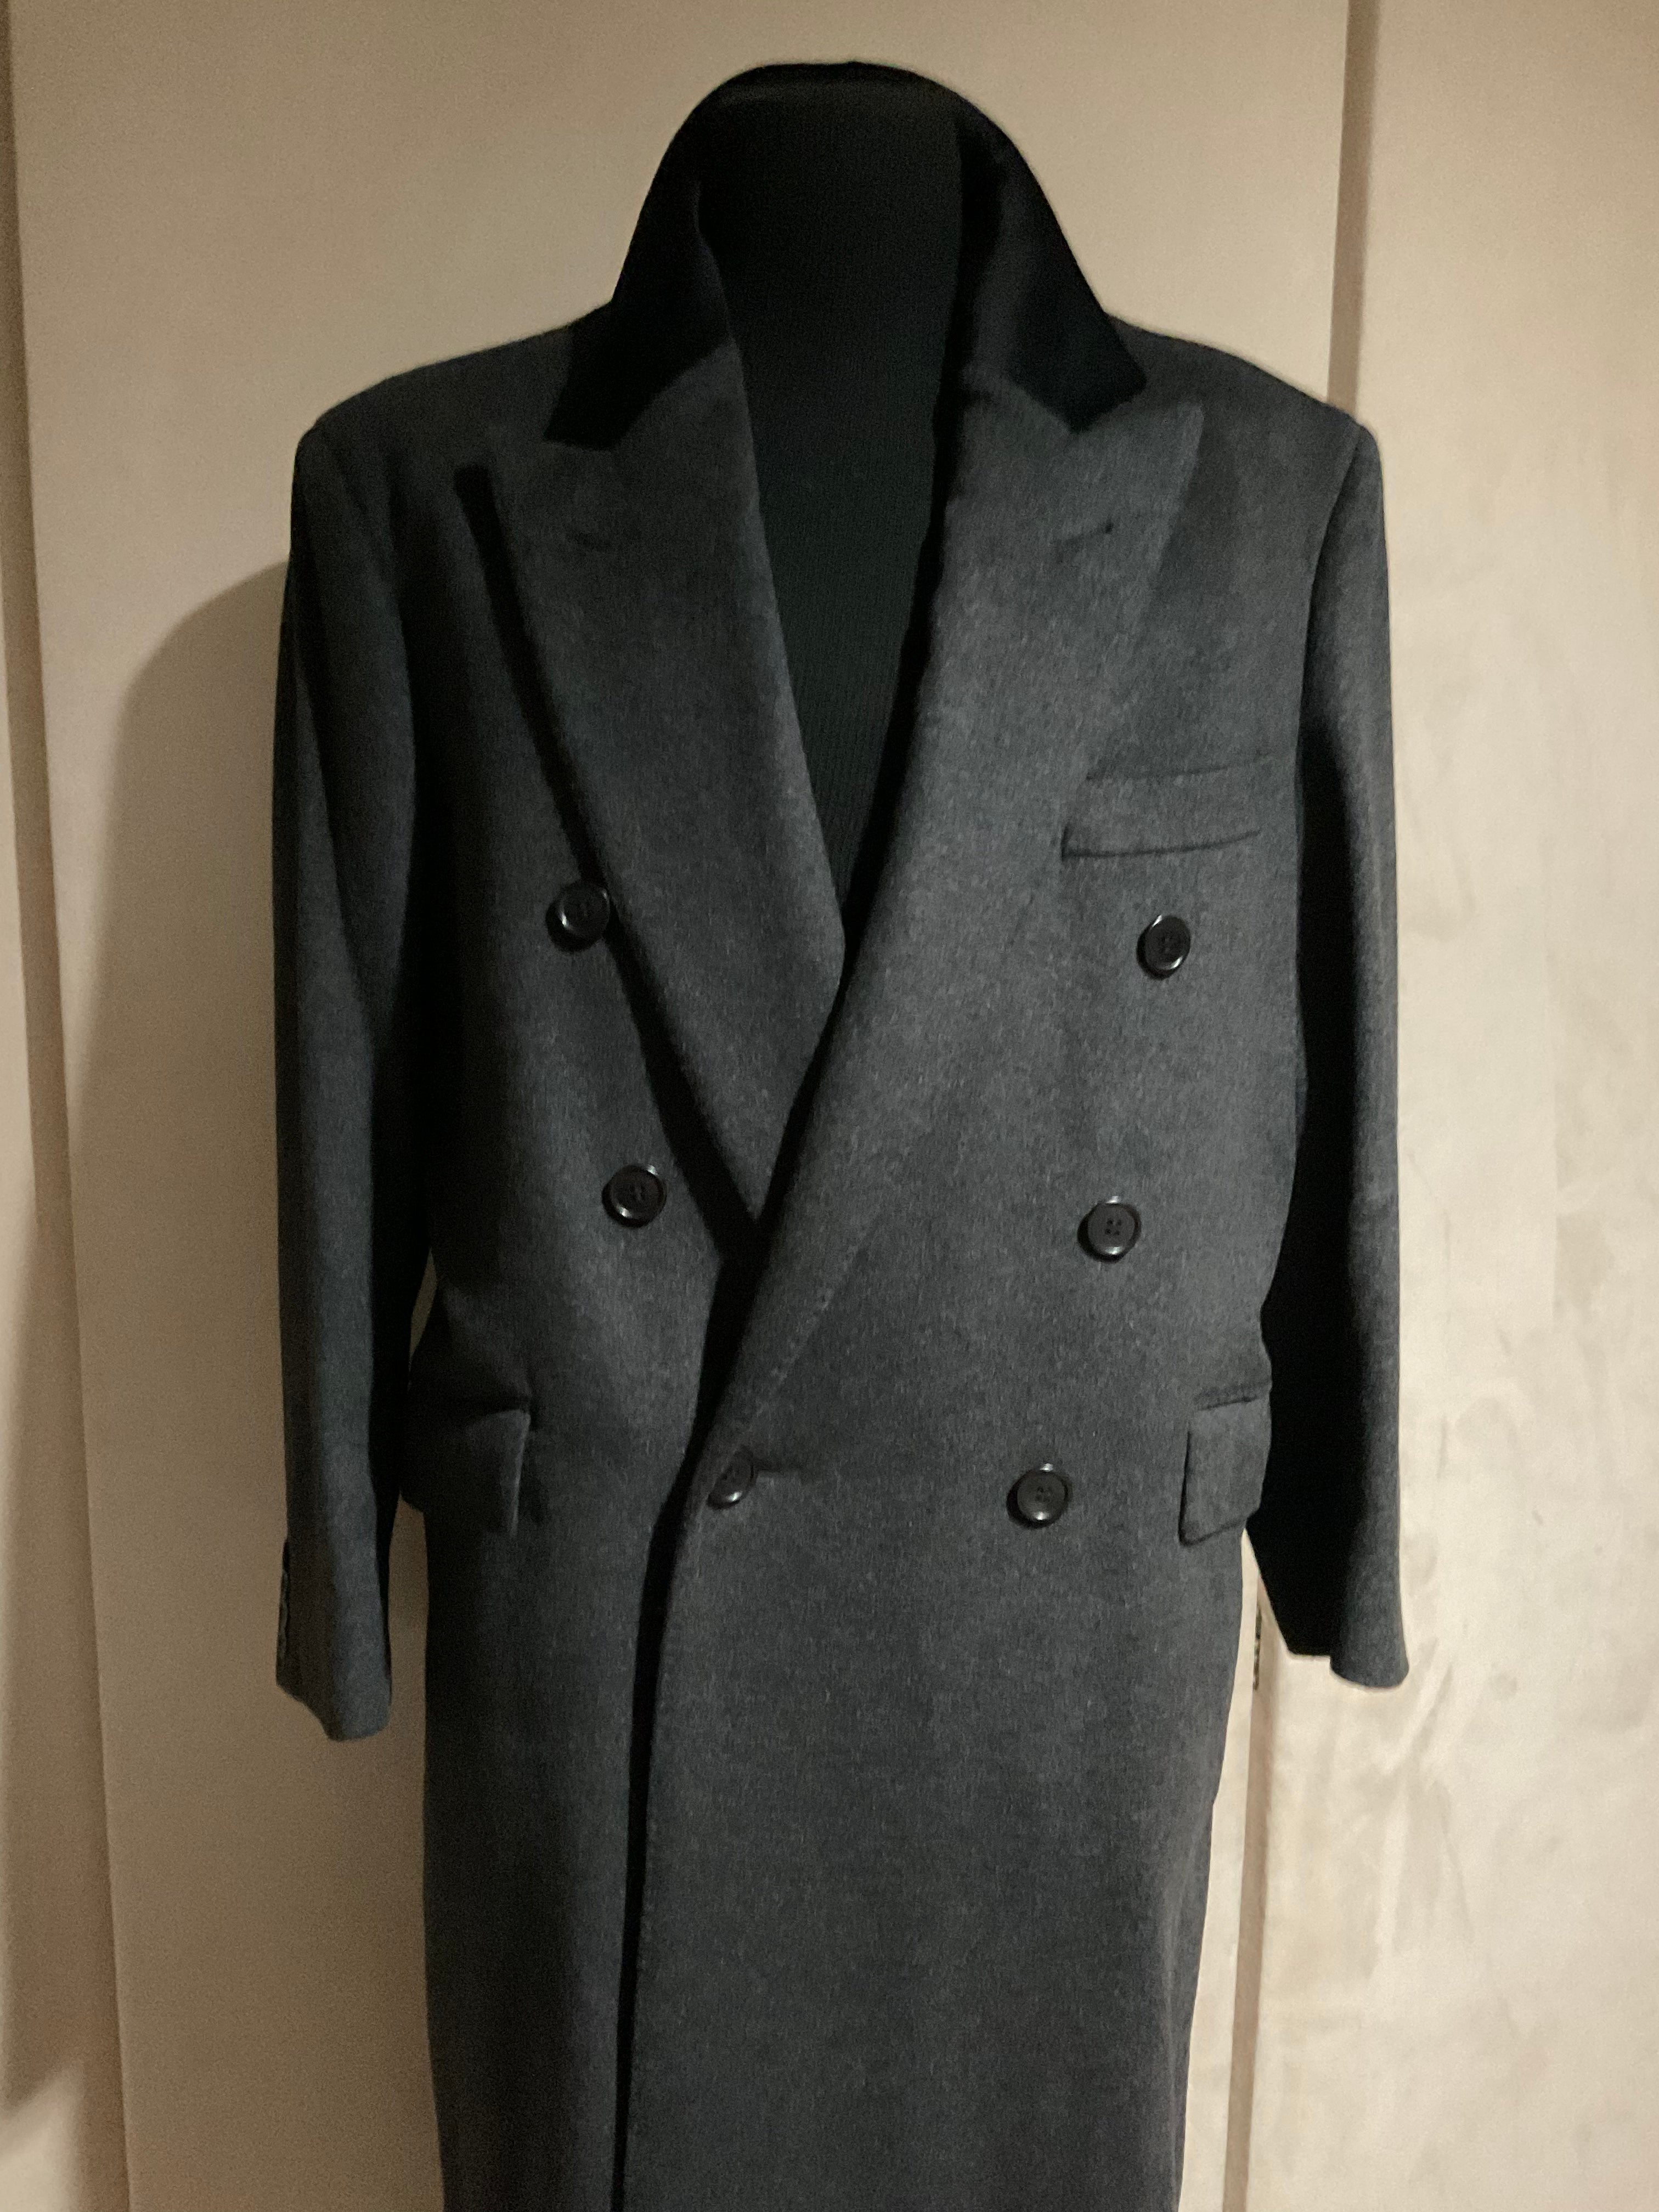 R P OVERCOAT / BLACK / PURE CASHMERE & MINK / NEW / 40 - 42 / MADE